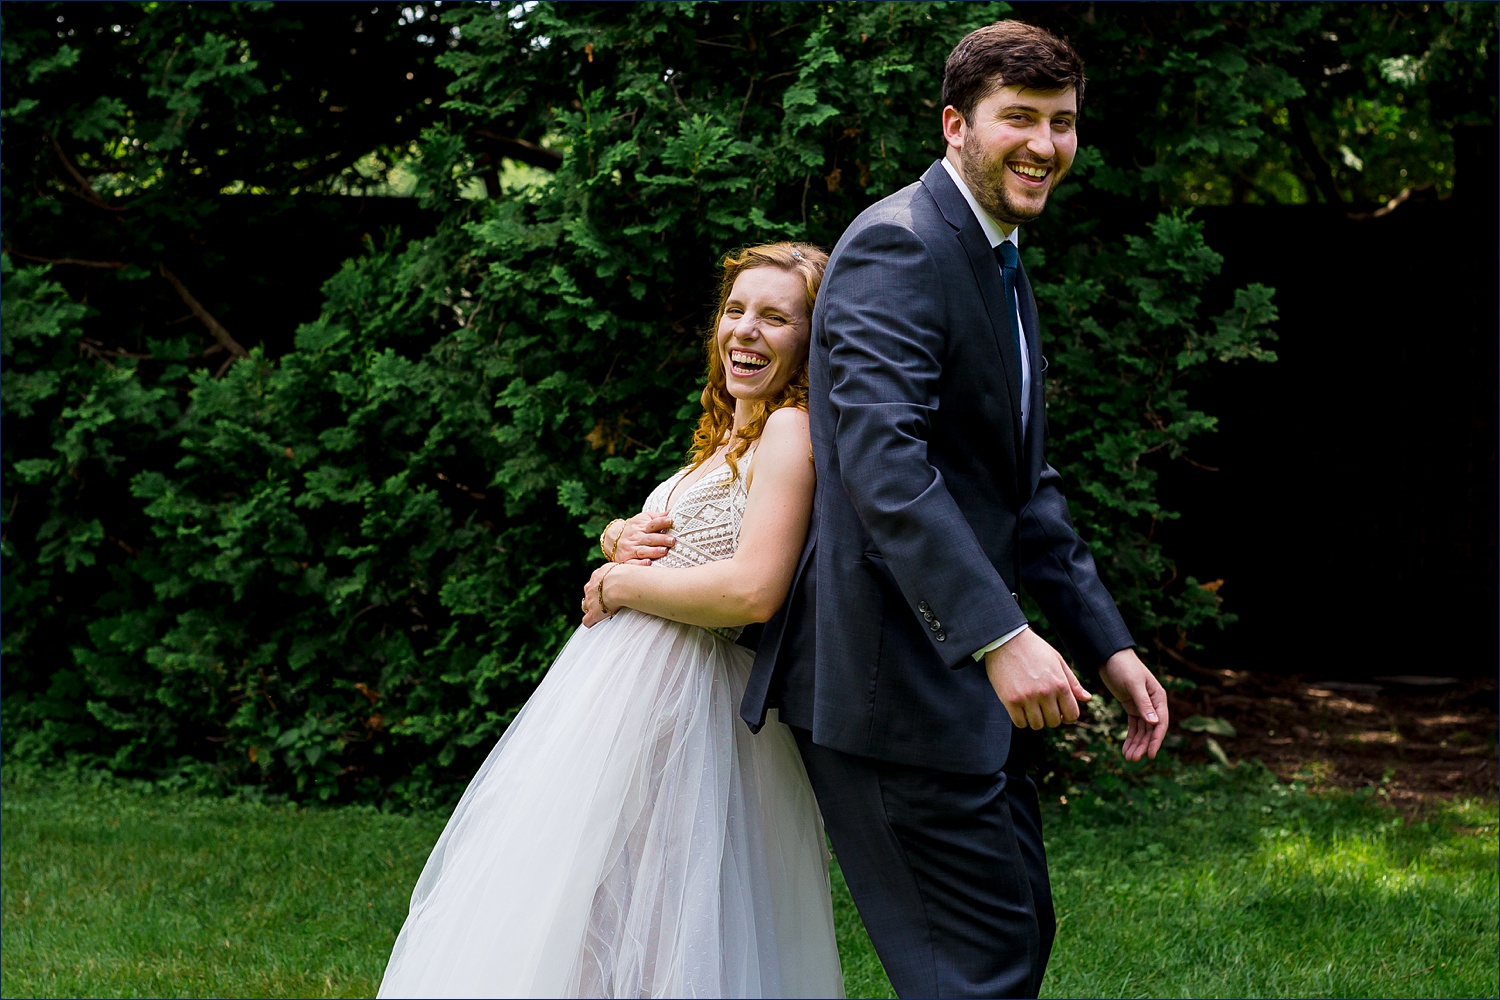 A funny joke gets the couple belly laughing on their intimate wedding day